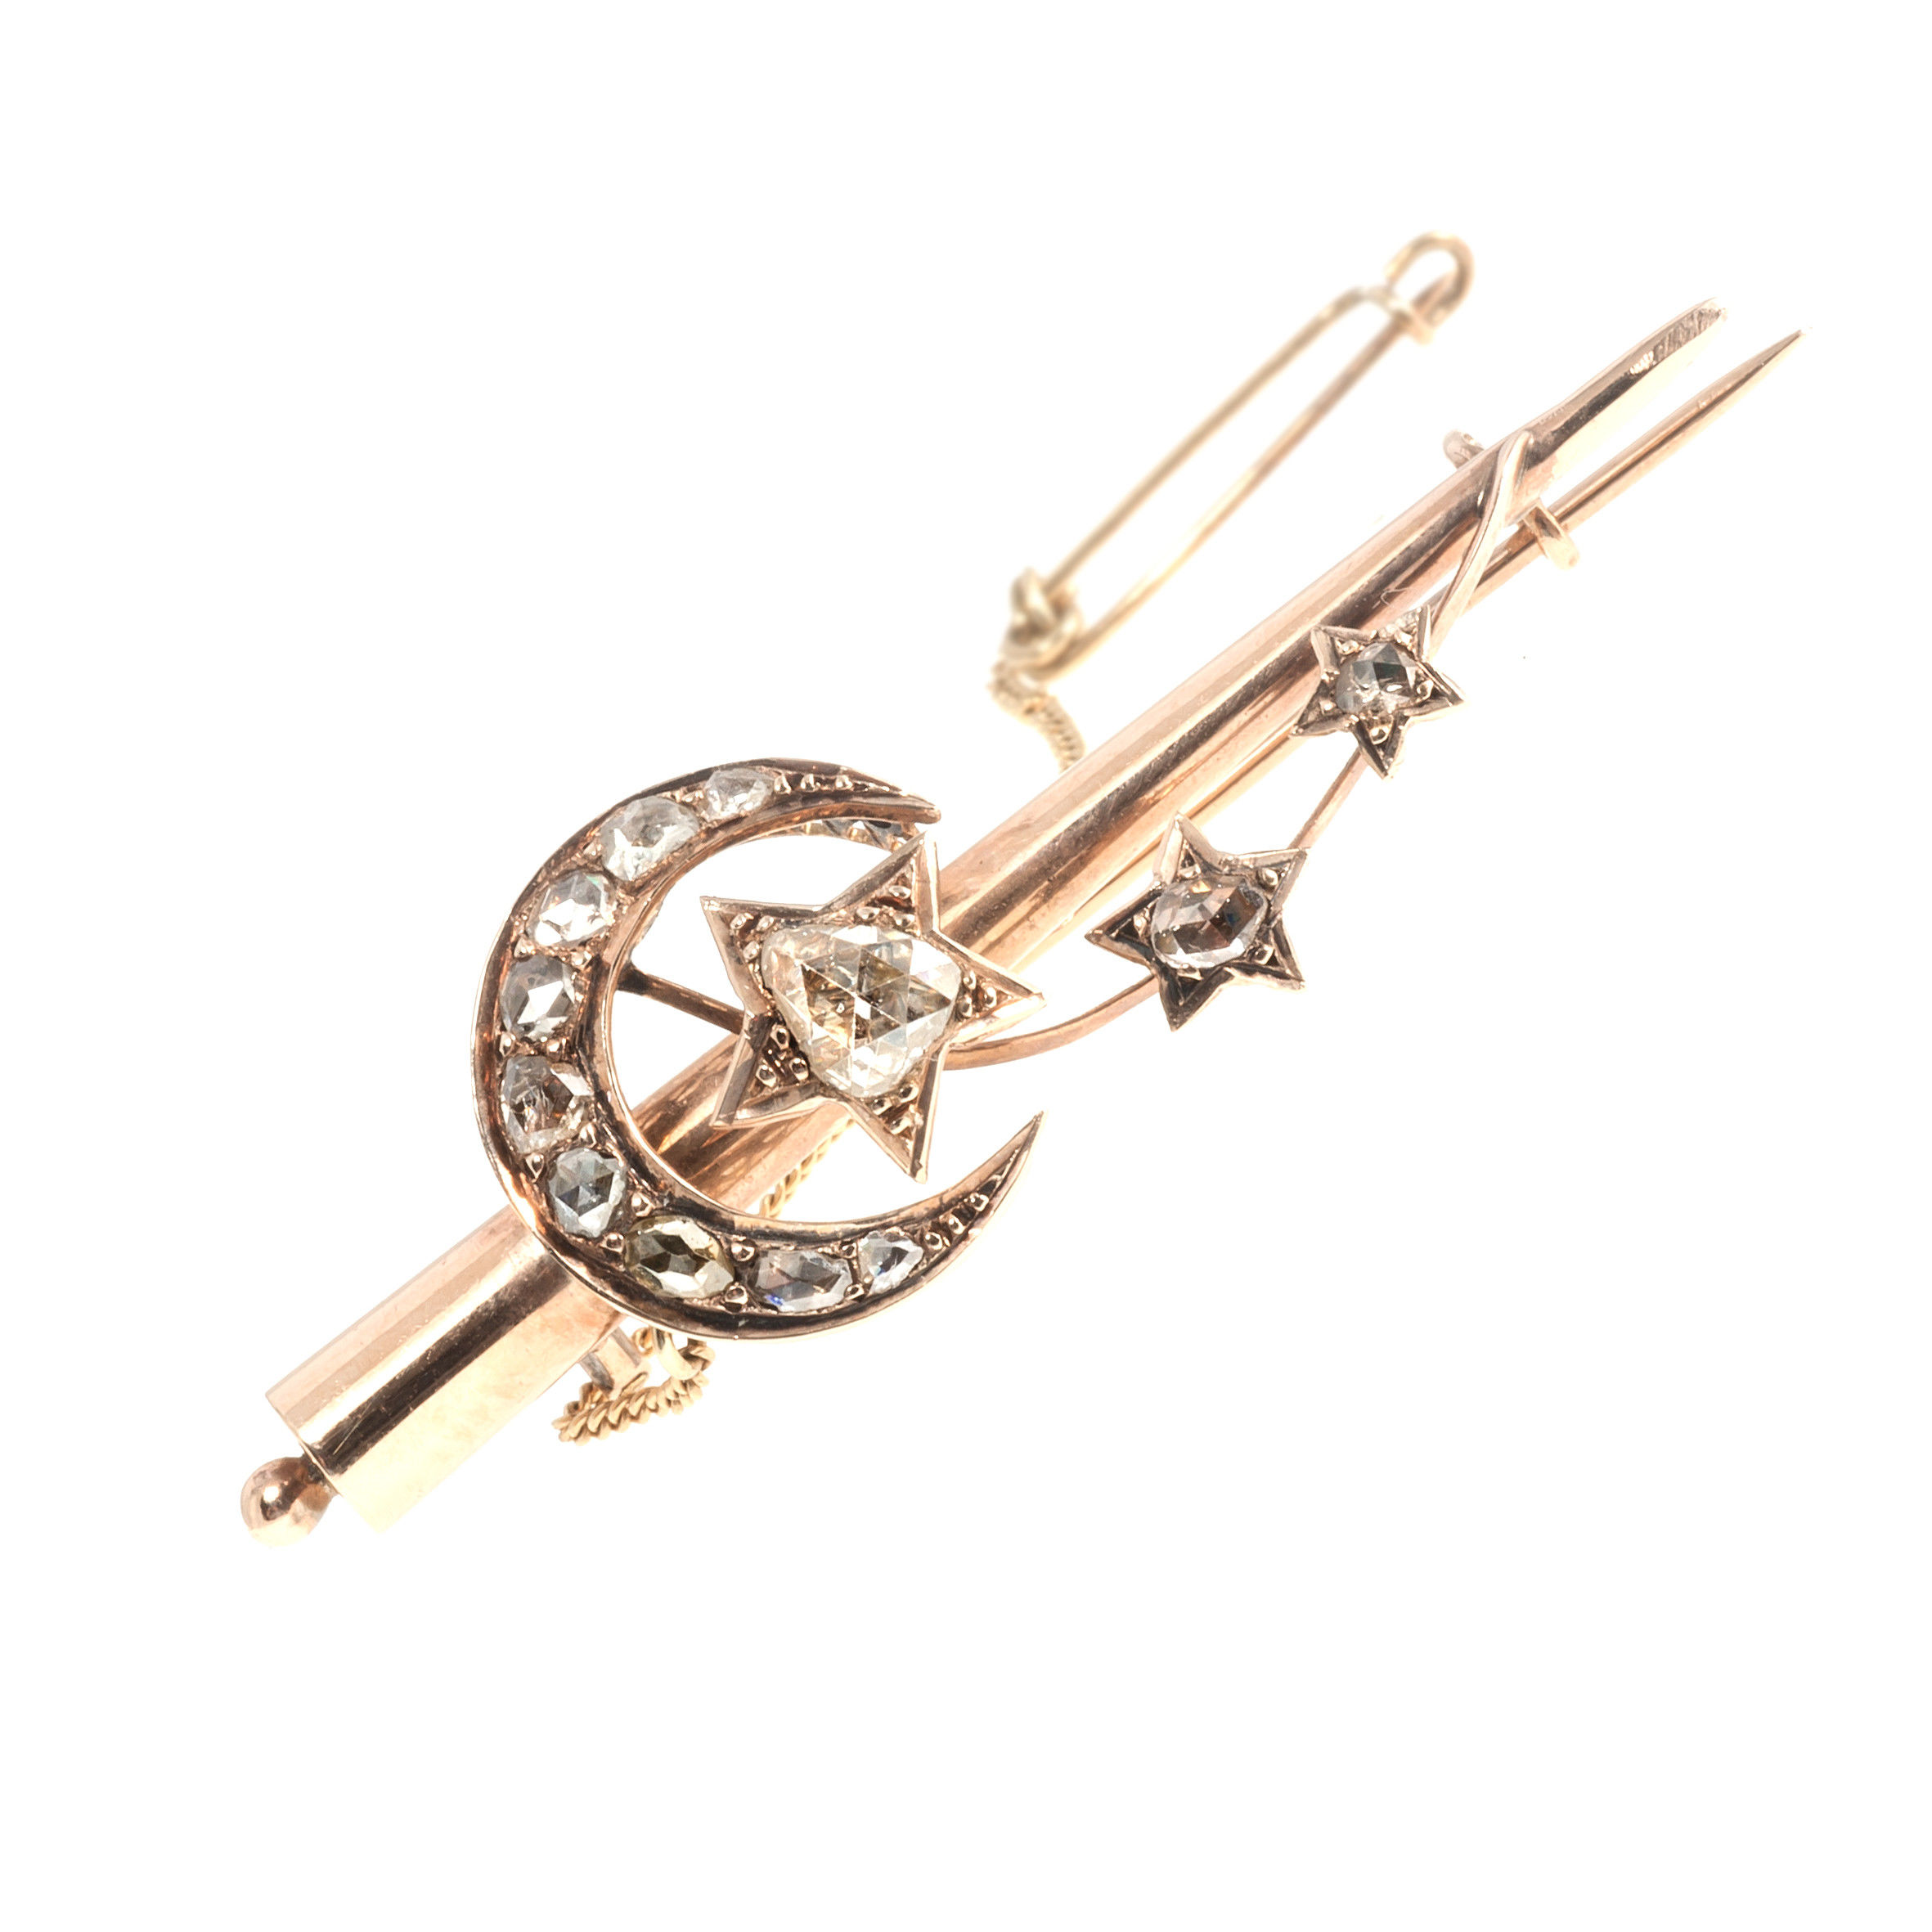 Victorian bar brooch with moon and stars, 14K red gold set with rose-cut diamonds